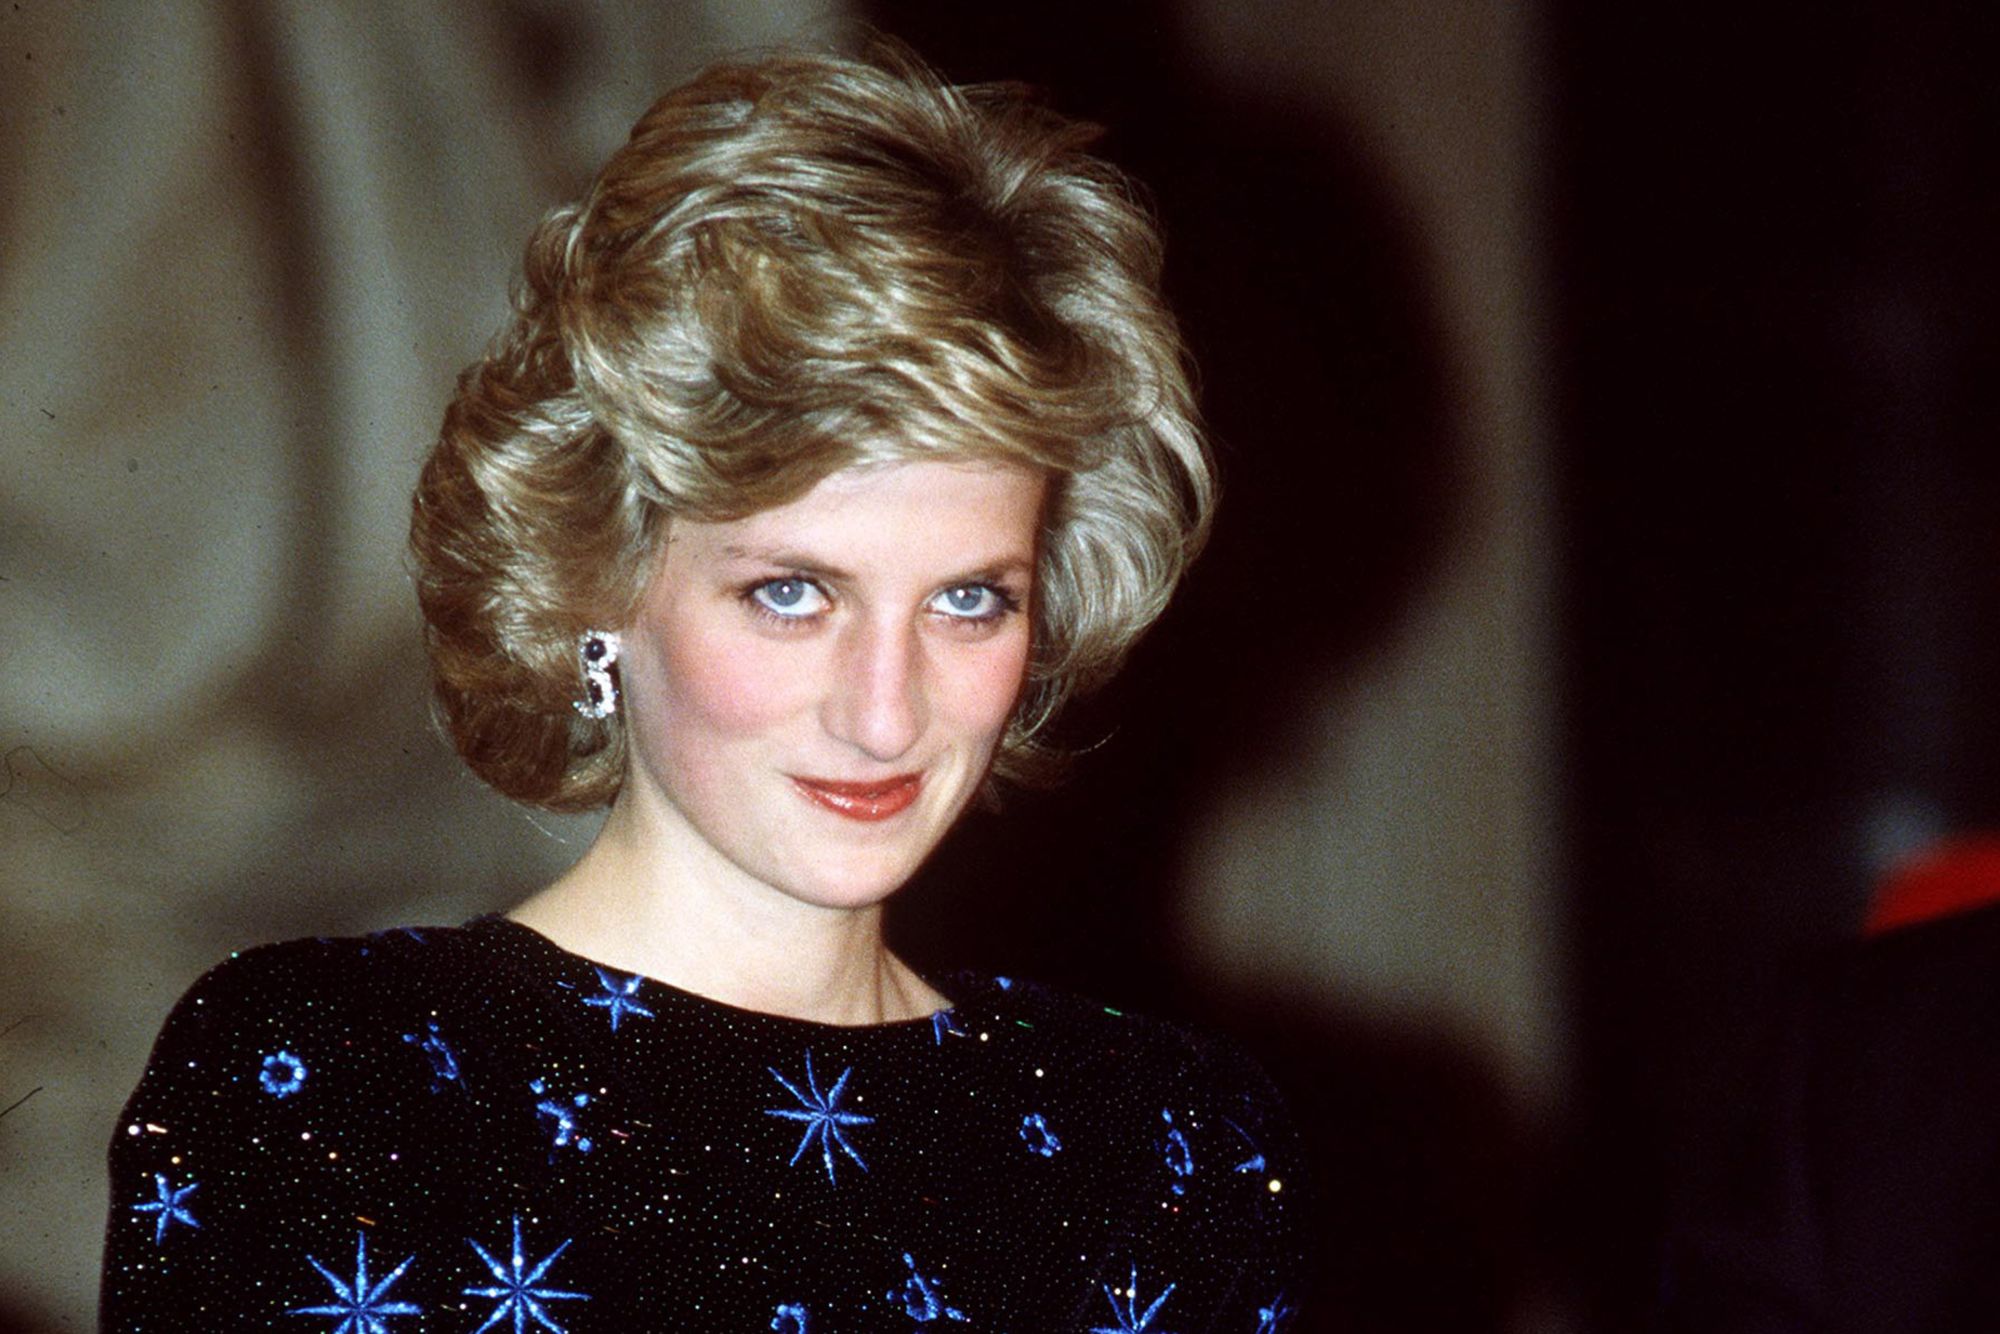 Princess Diana, pictured wearing the dress